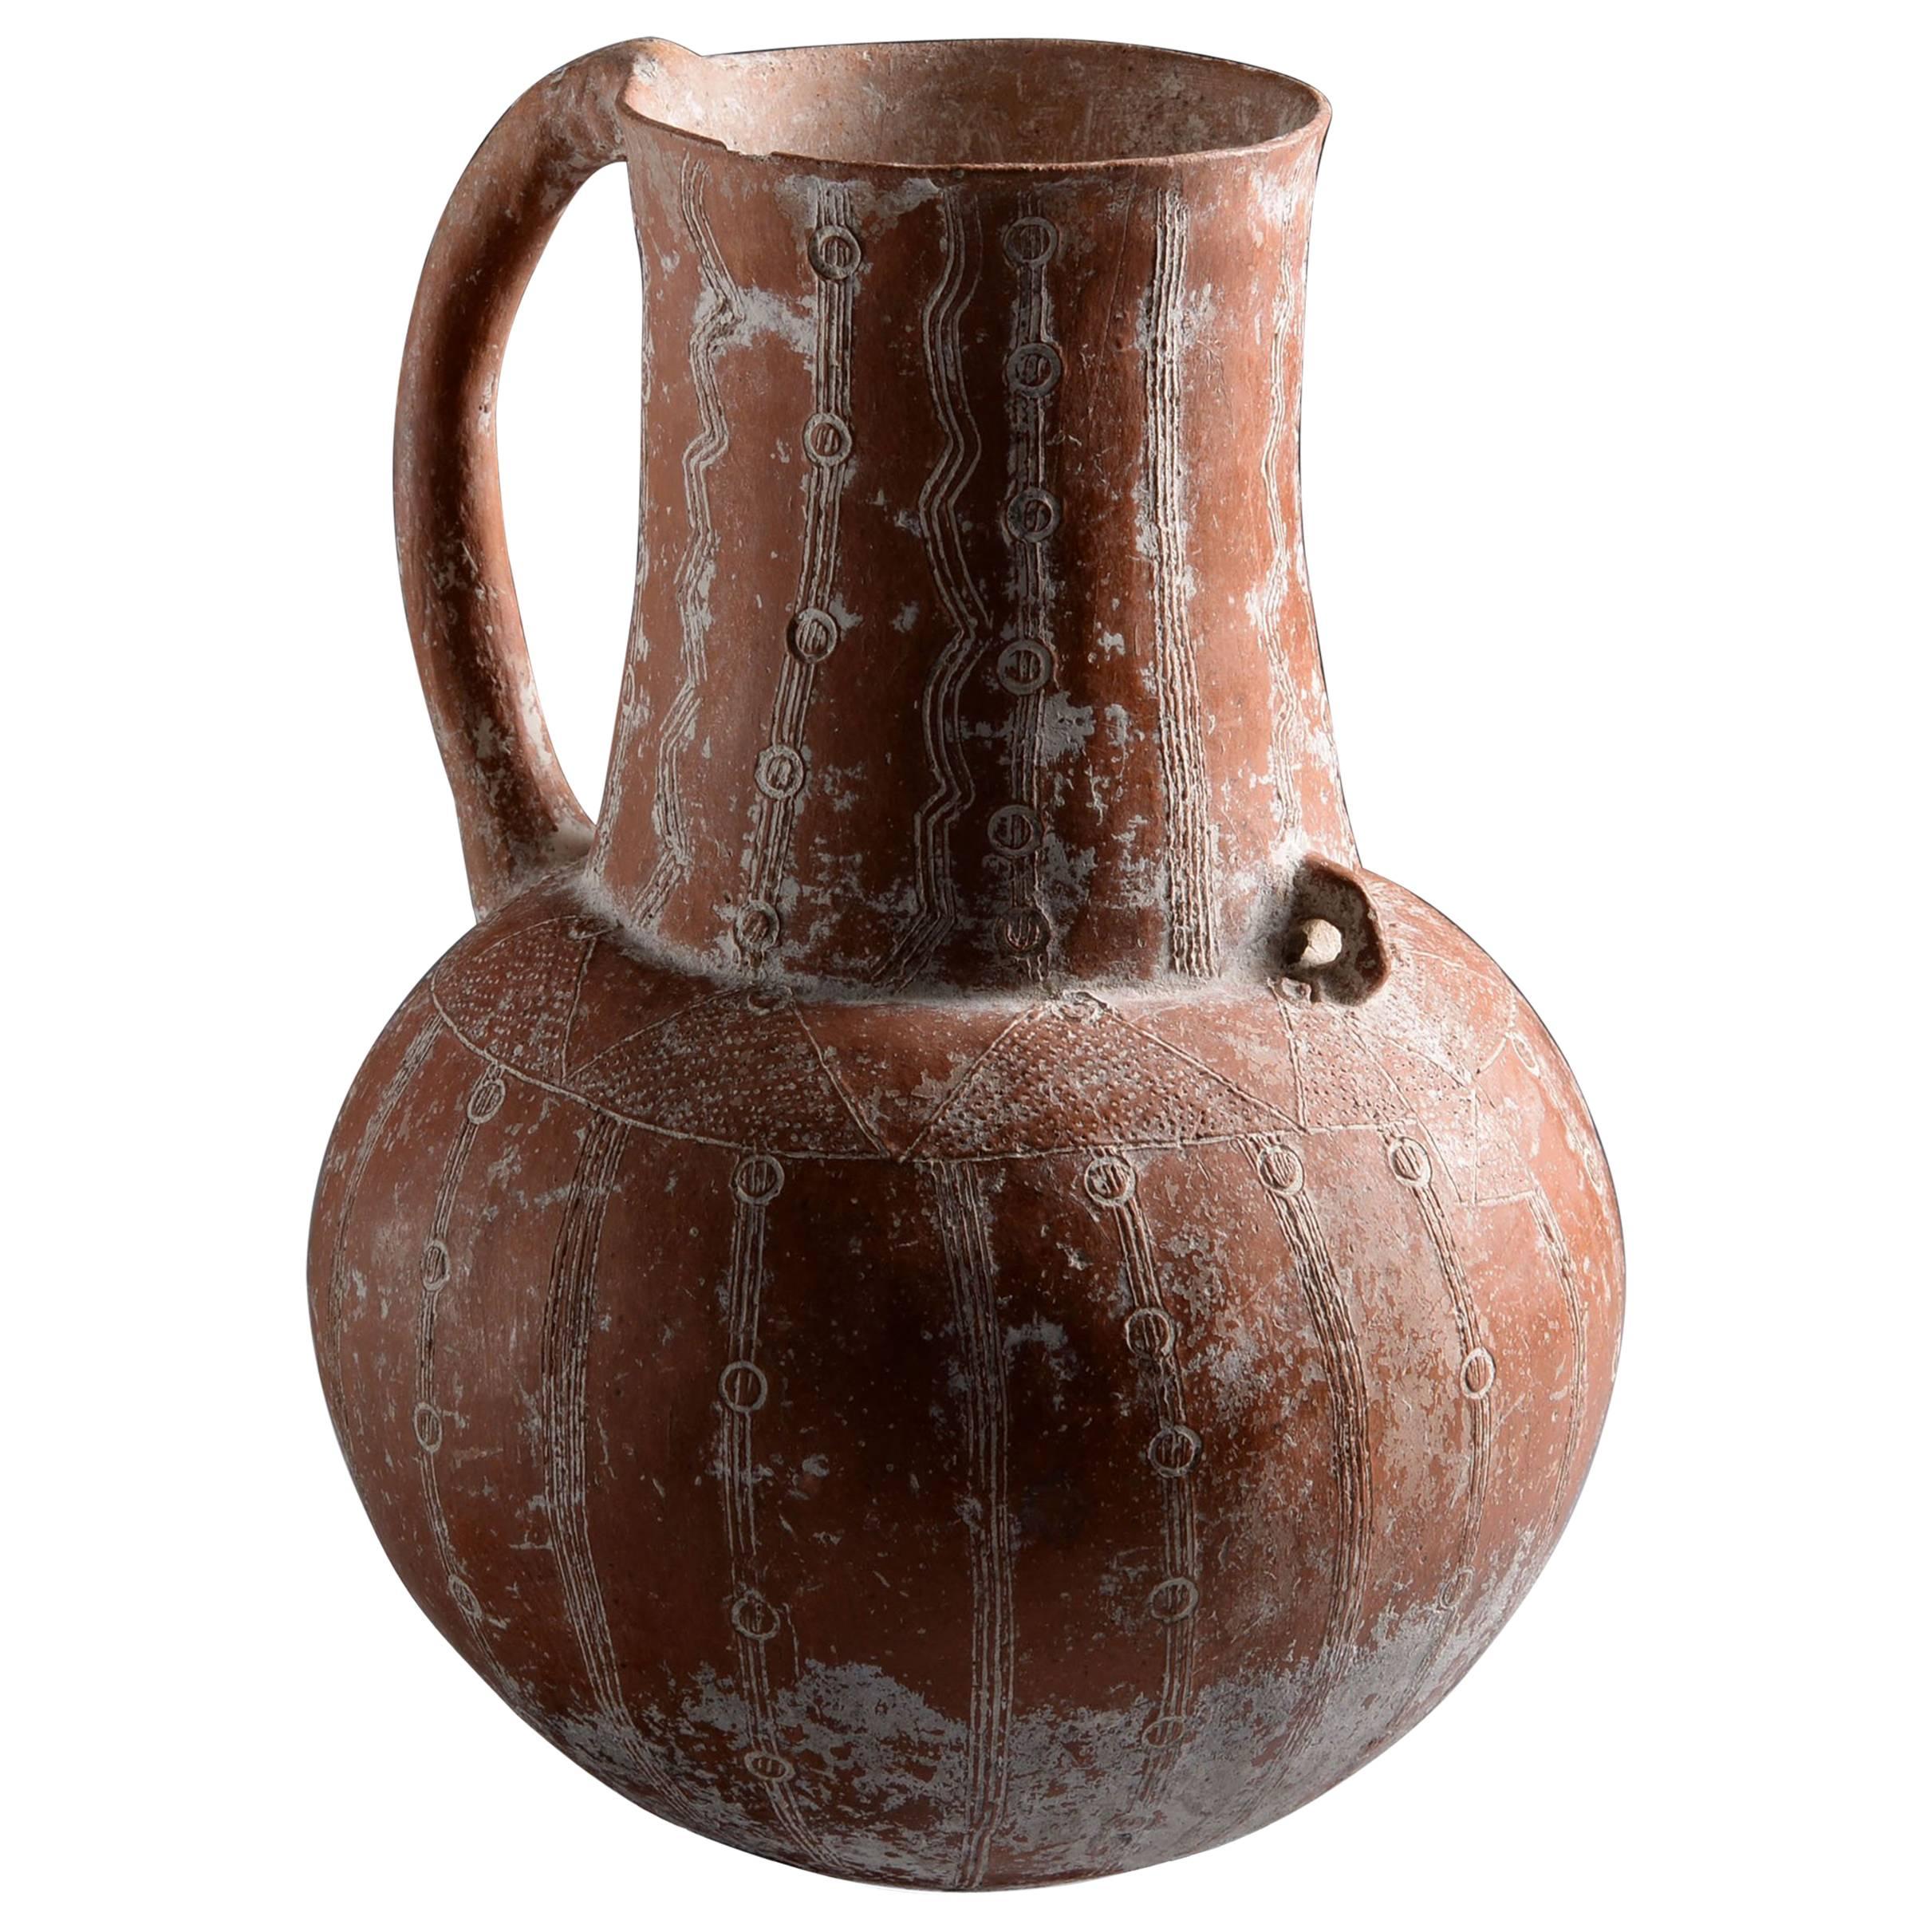 Ancient Cypriot Early Bronze Age Jug, 2400 Bc